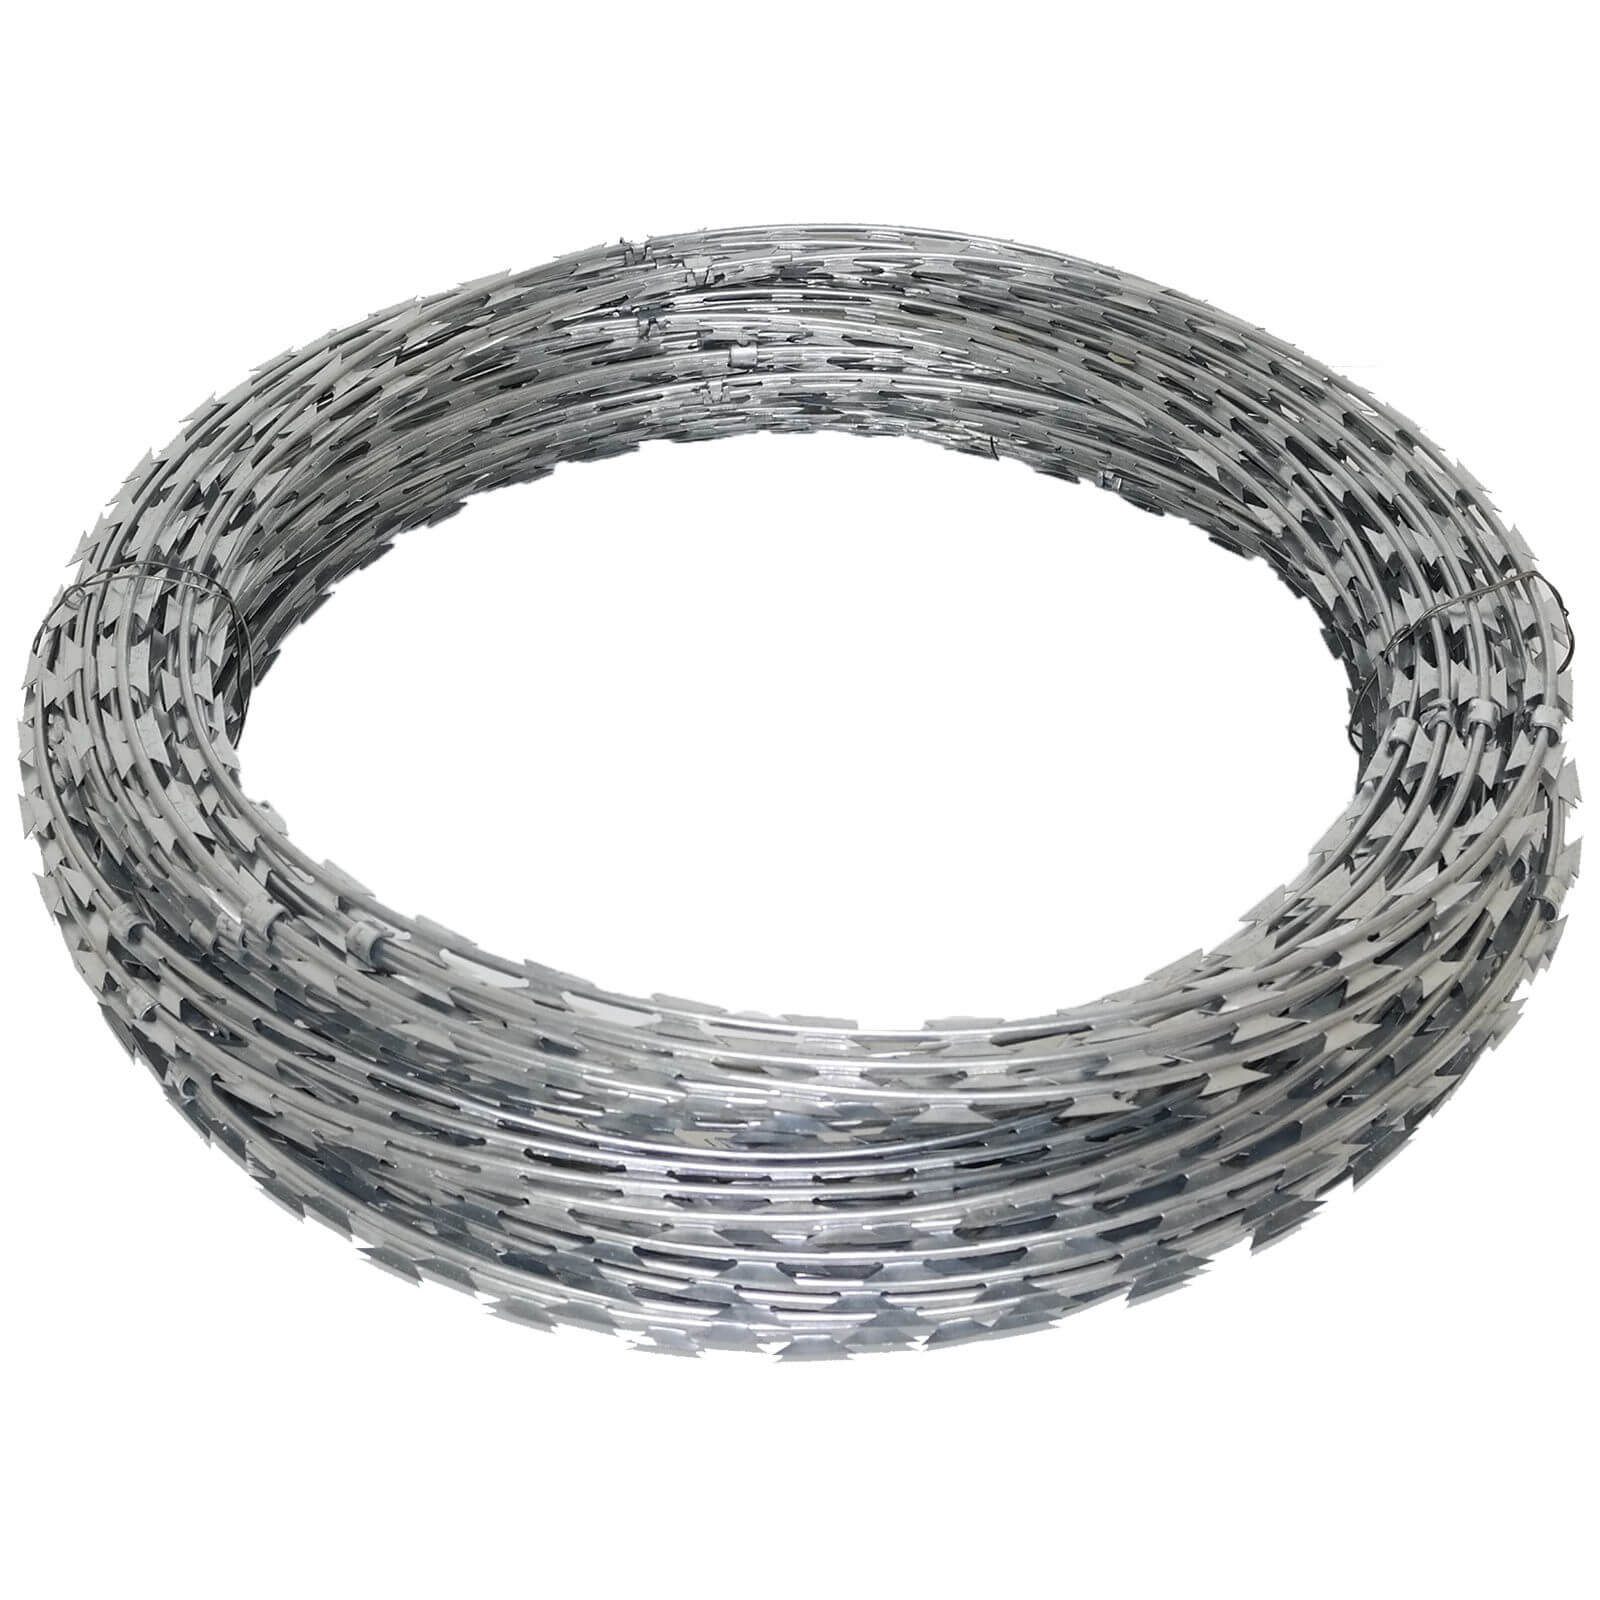 Ensuring Safety with Barbed Wire Coil: Choose Razor Coil for Maximum Protection